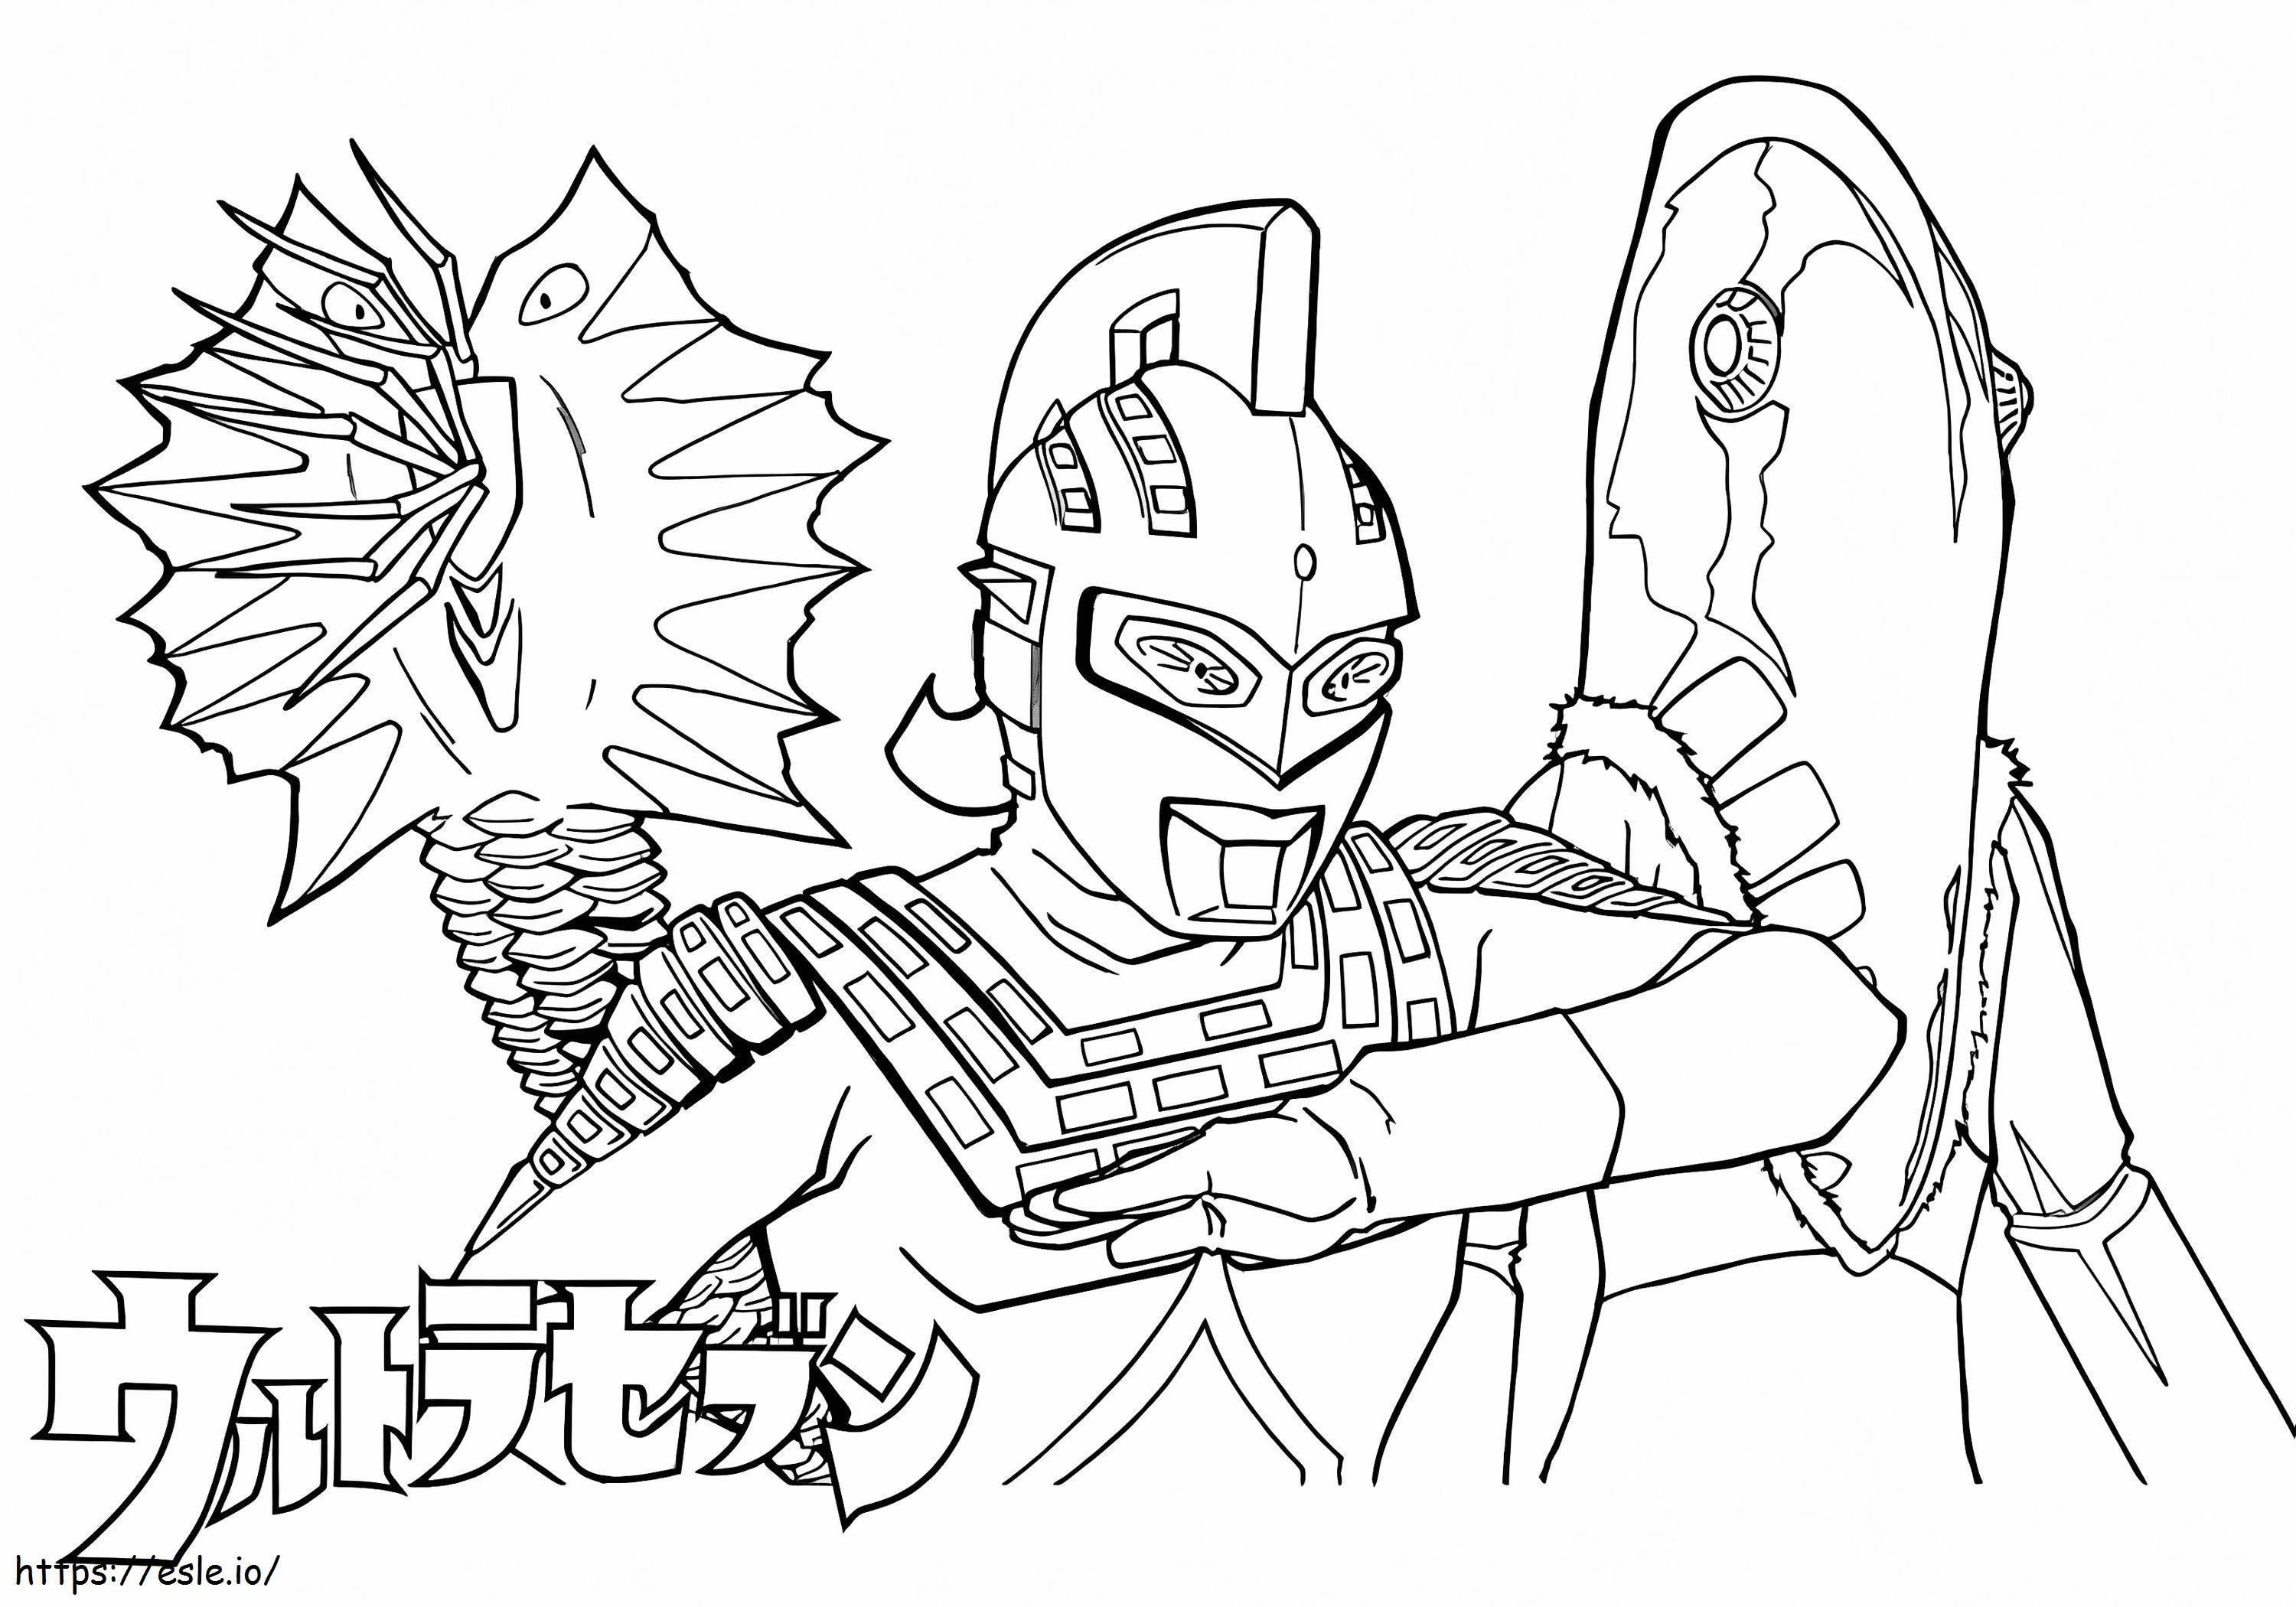 Ultraman Team 1 coloring page